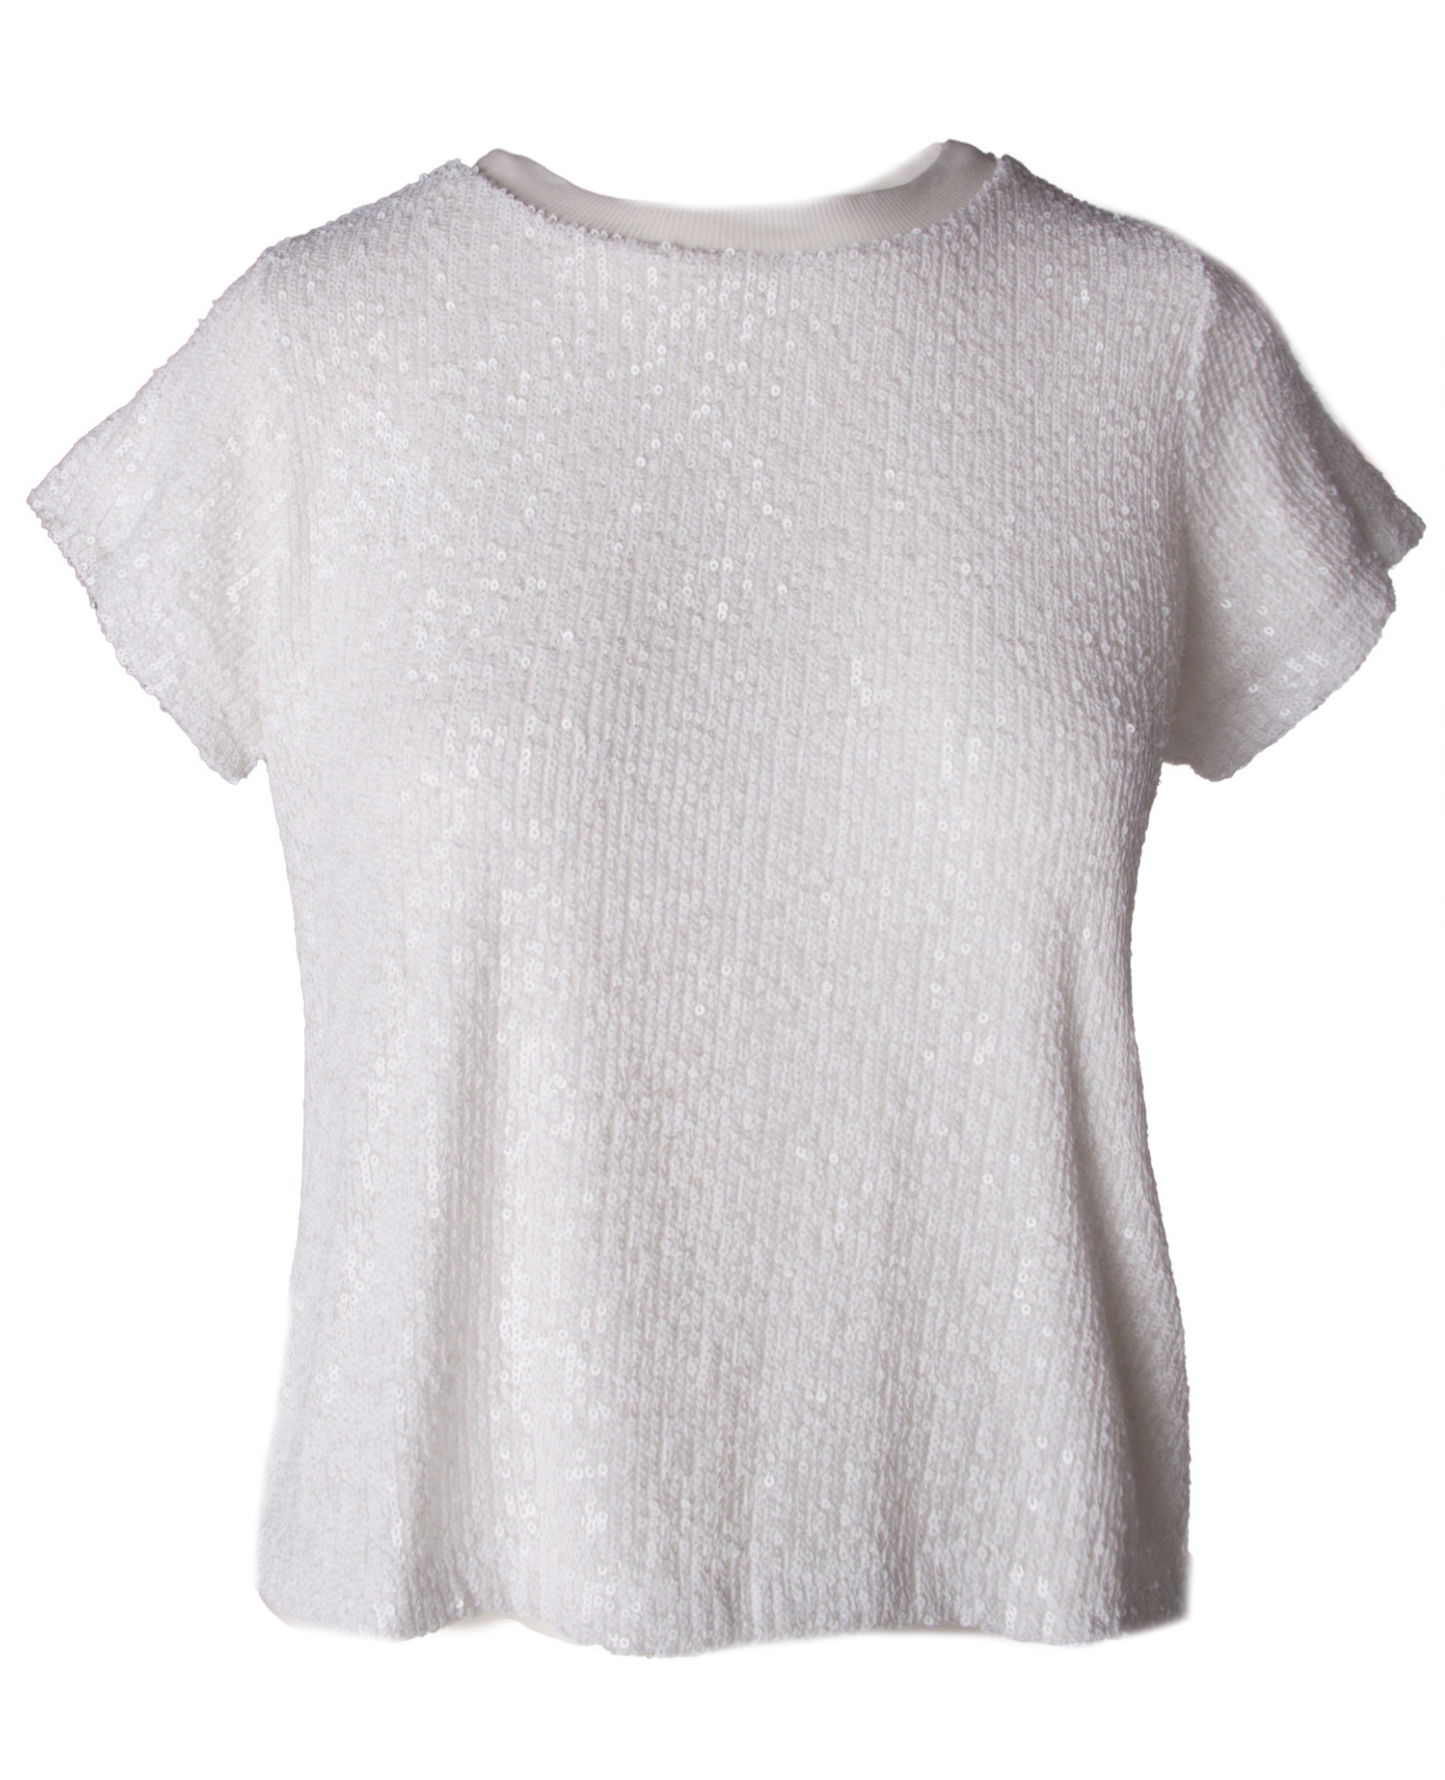 Sequin Knit Top - The French Shoppe